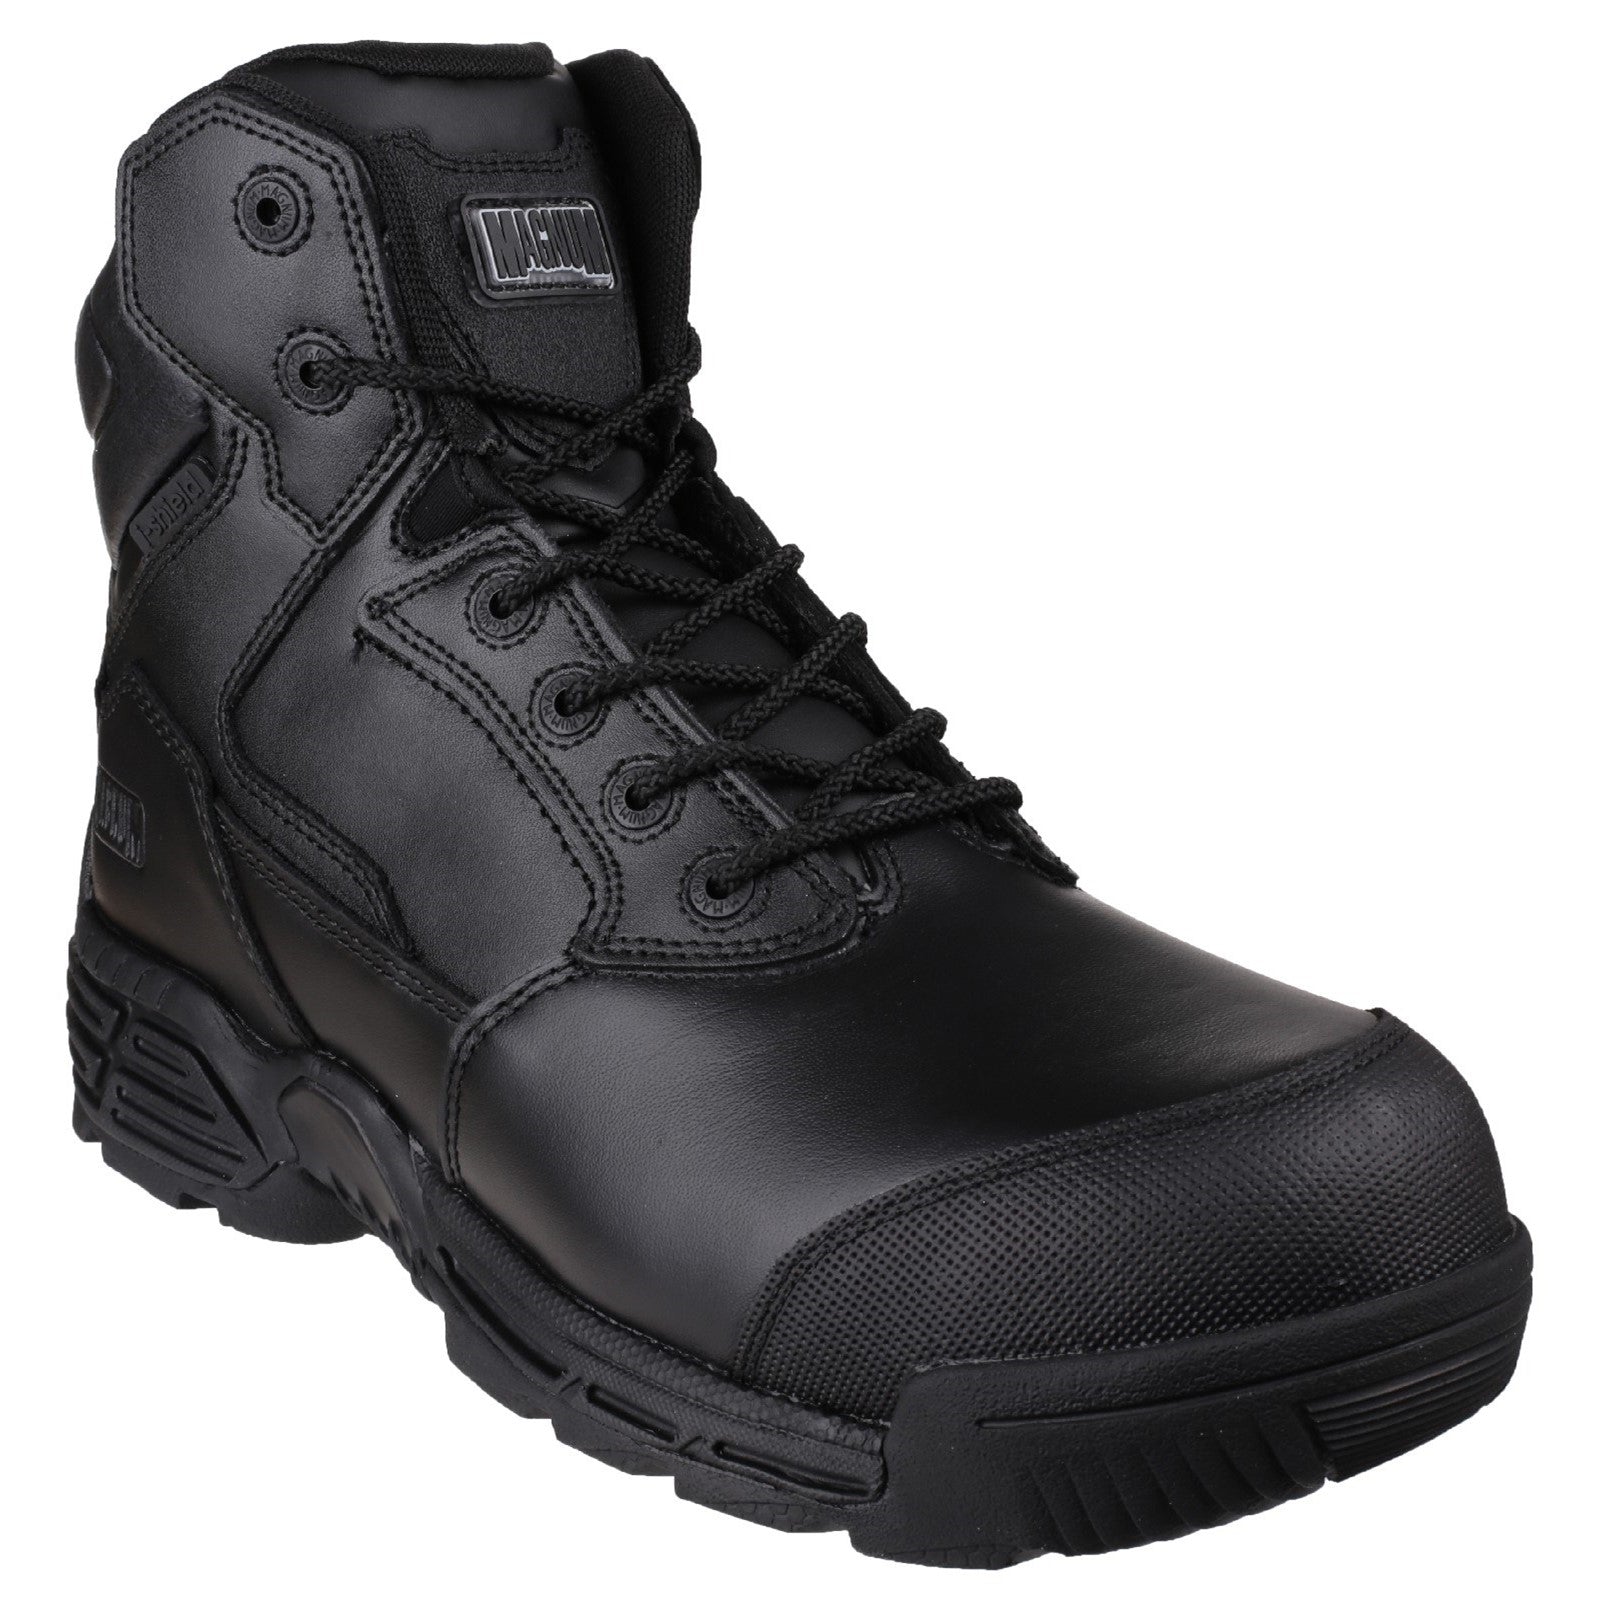 Magnum Stealth Force 6.0 Side-Zip CT CP Uniform Safety Boot